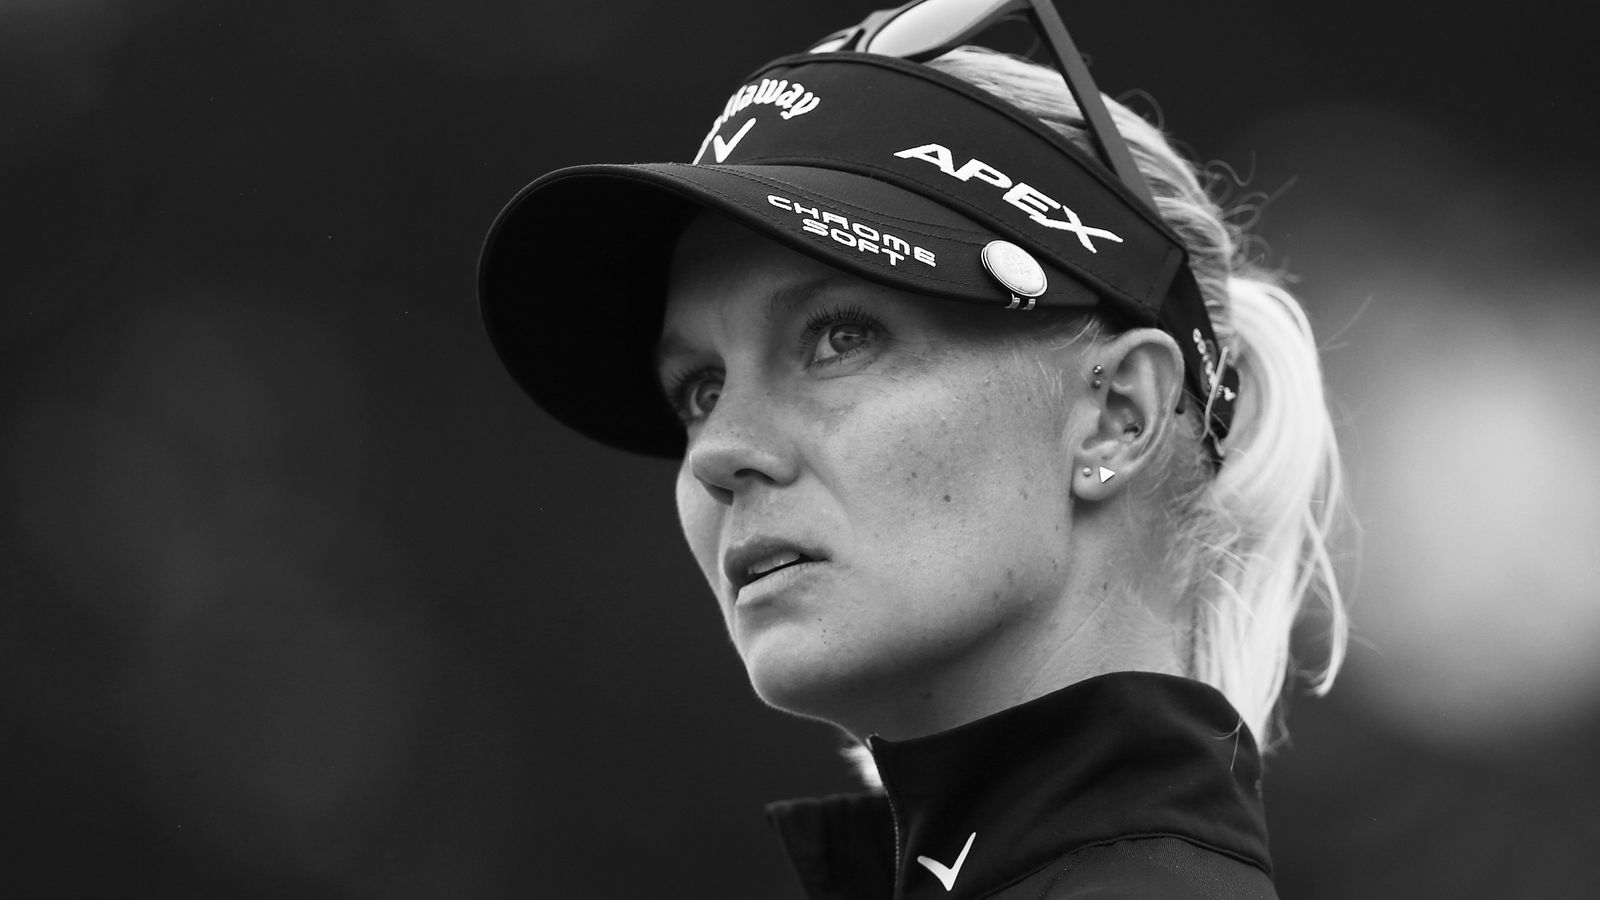 LPGA star Madelene Sagstrom opens up on being sexually abused as a child.